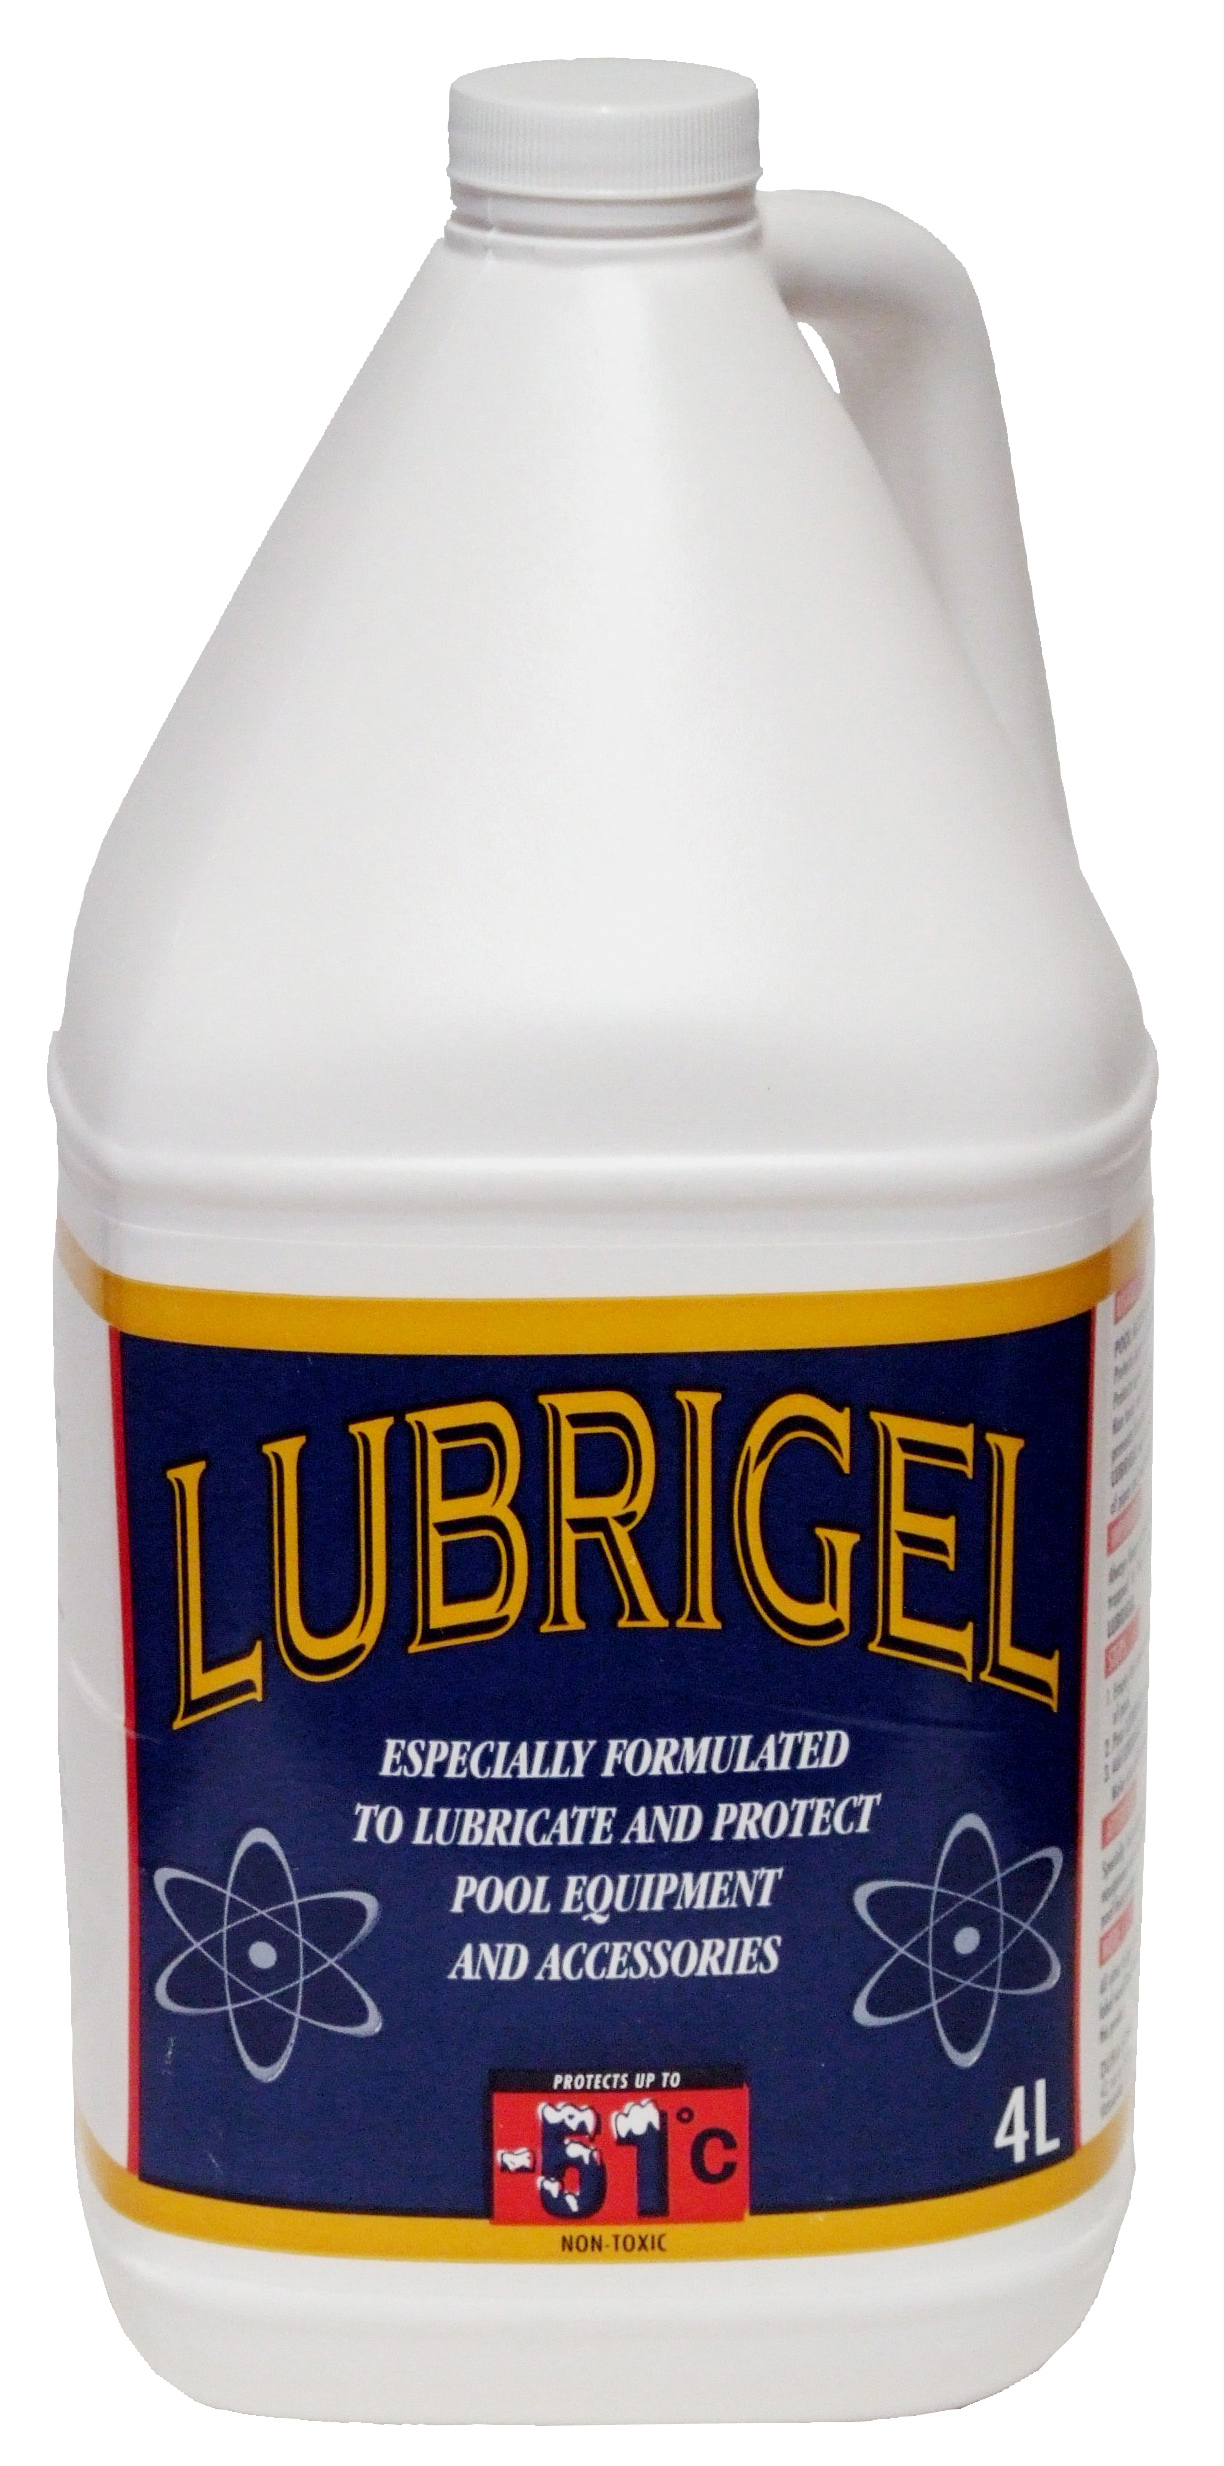 Lubrigel - Anti-Freeze for Pools and Hot Tubs